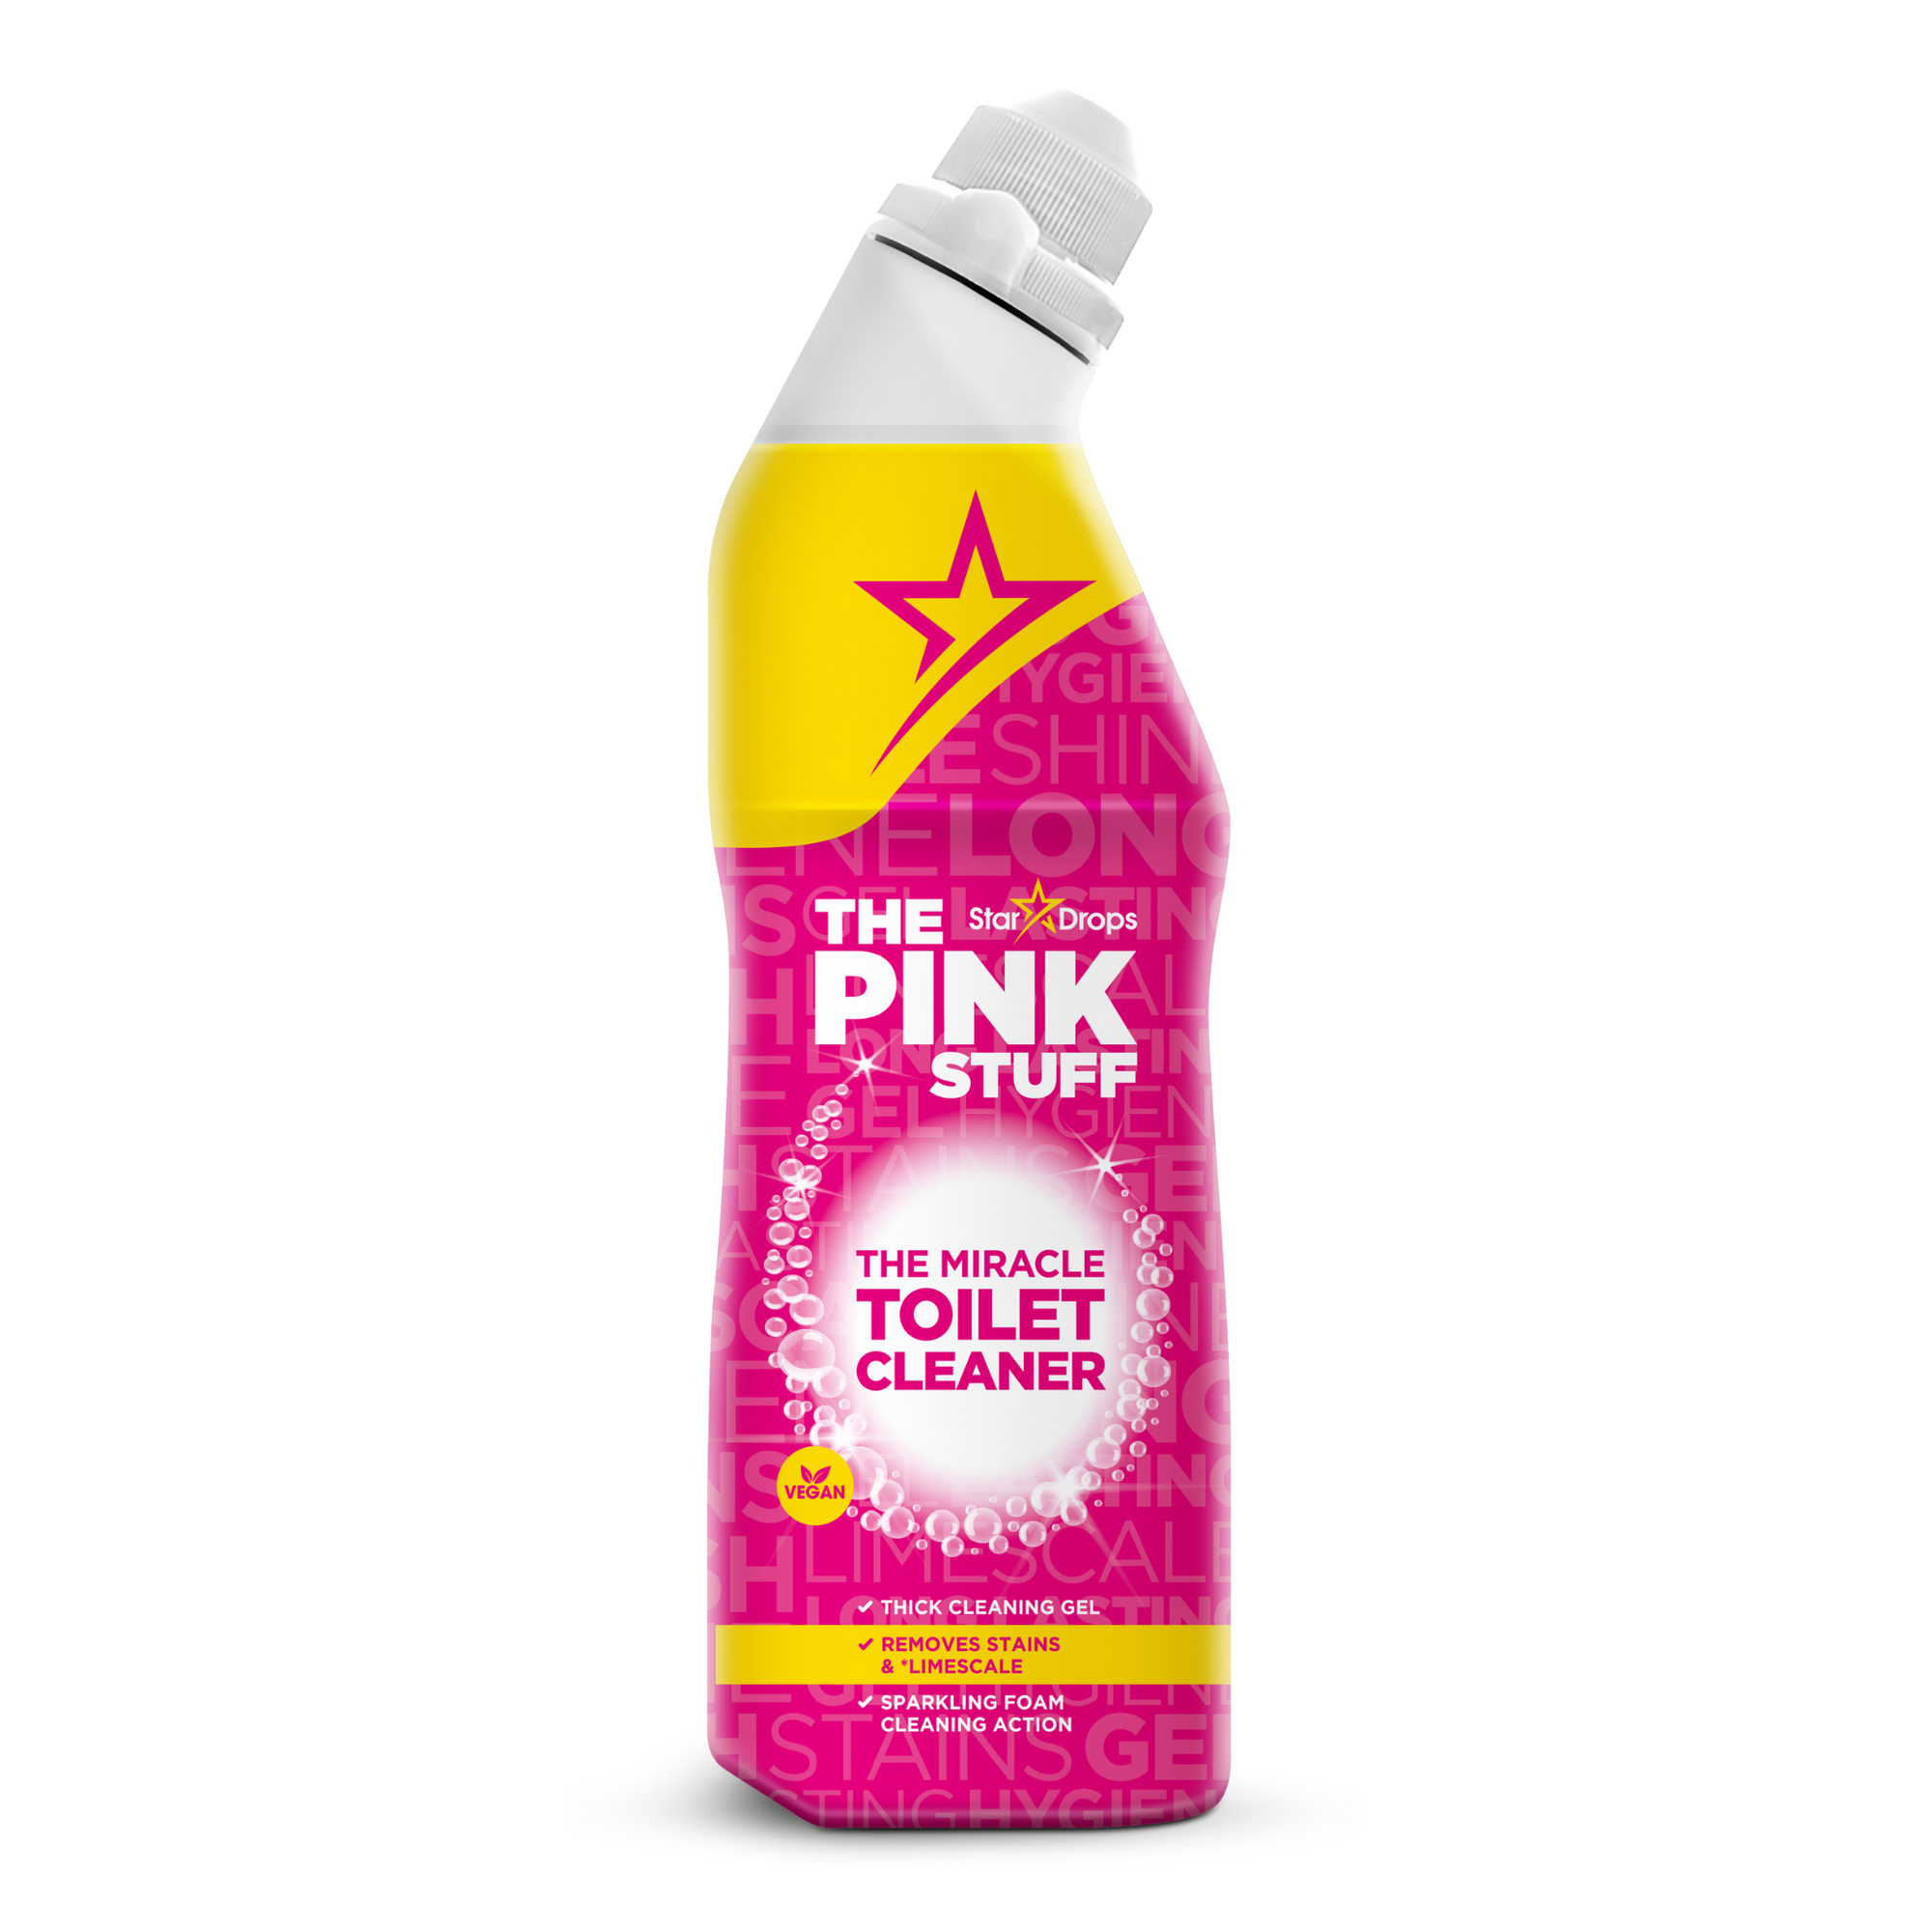 The Pink Stuff - The Miracle Toilet Cleaner (750ml)